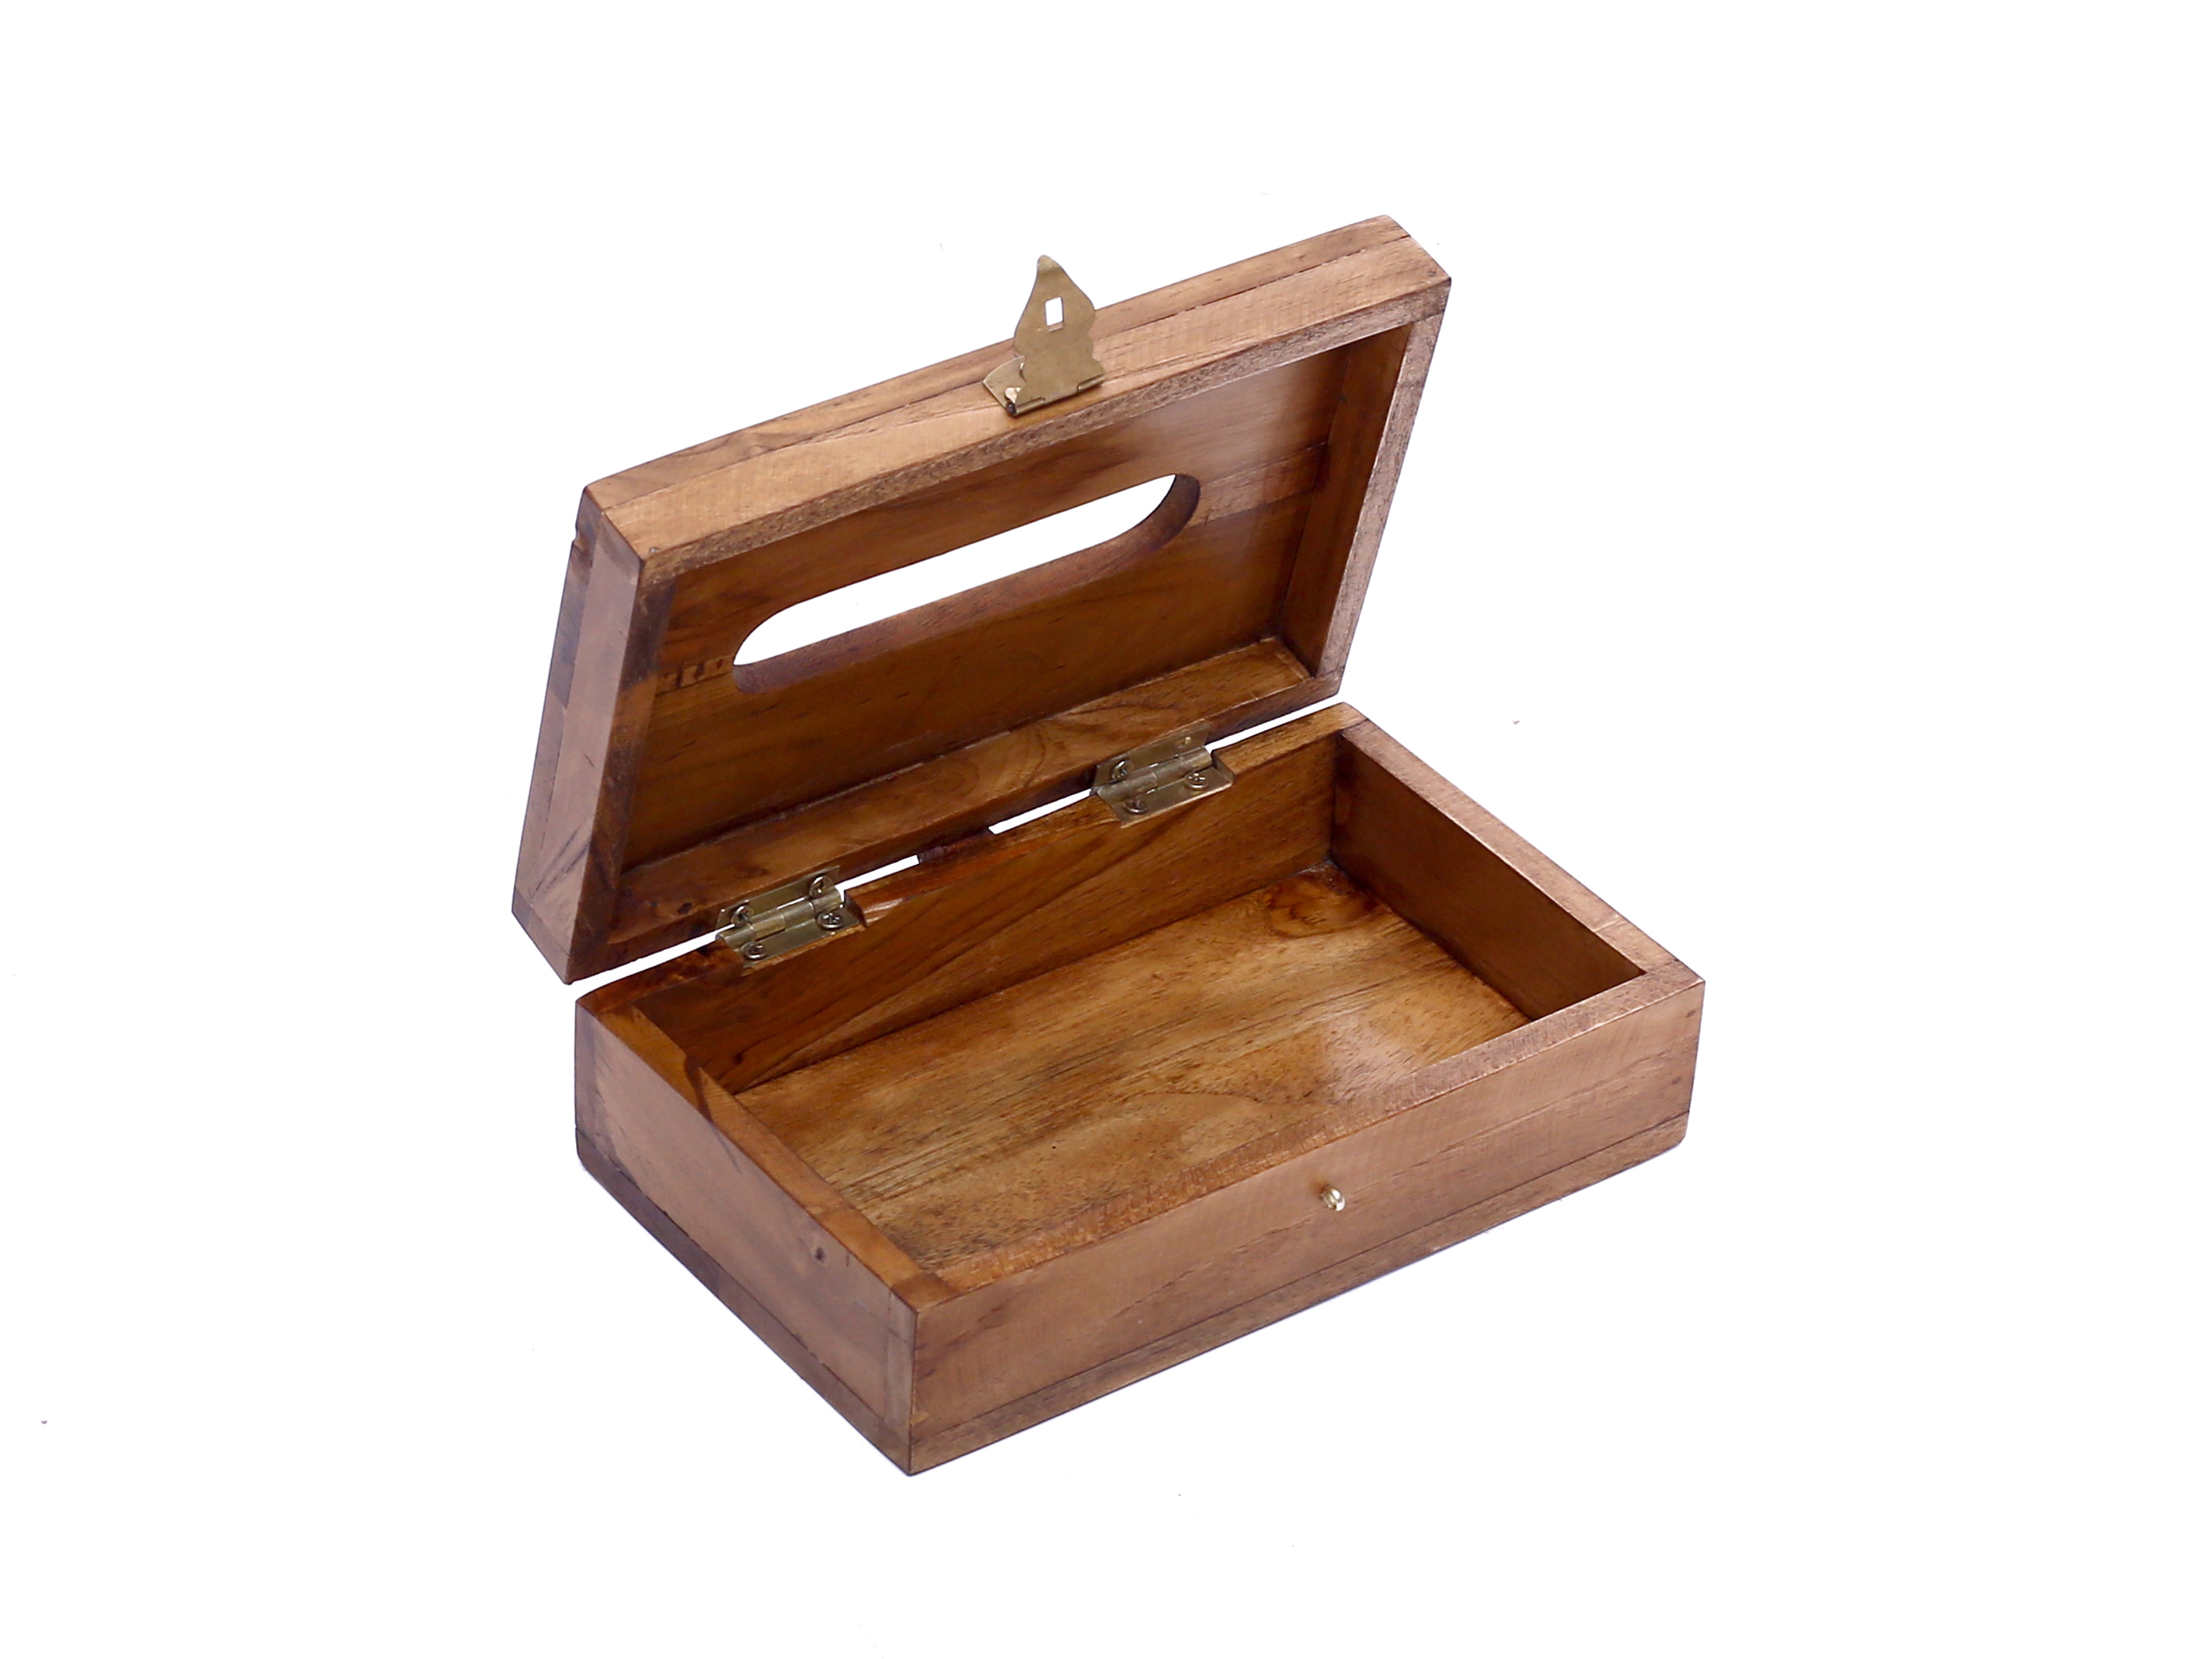 Solid Wood Tissue Box Wooden Box